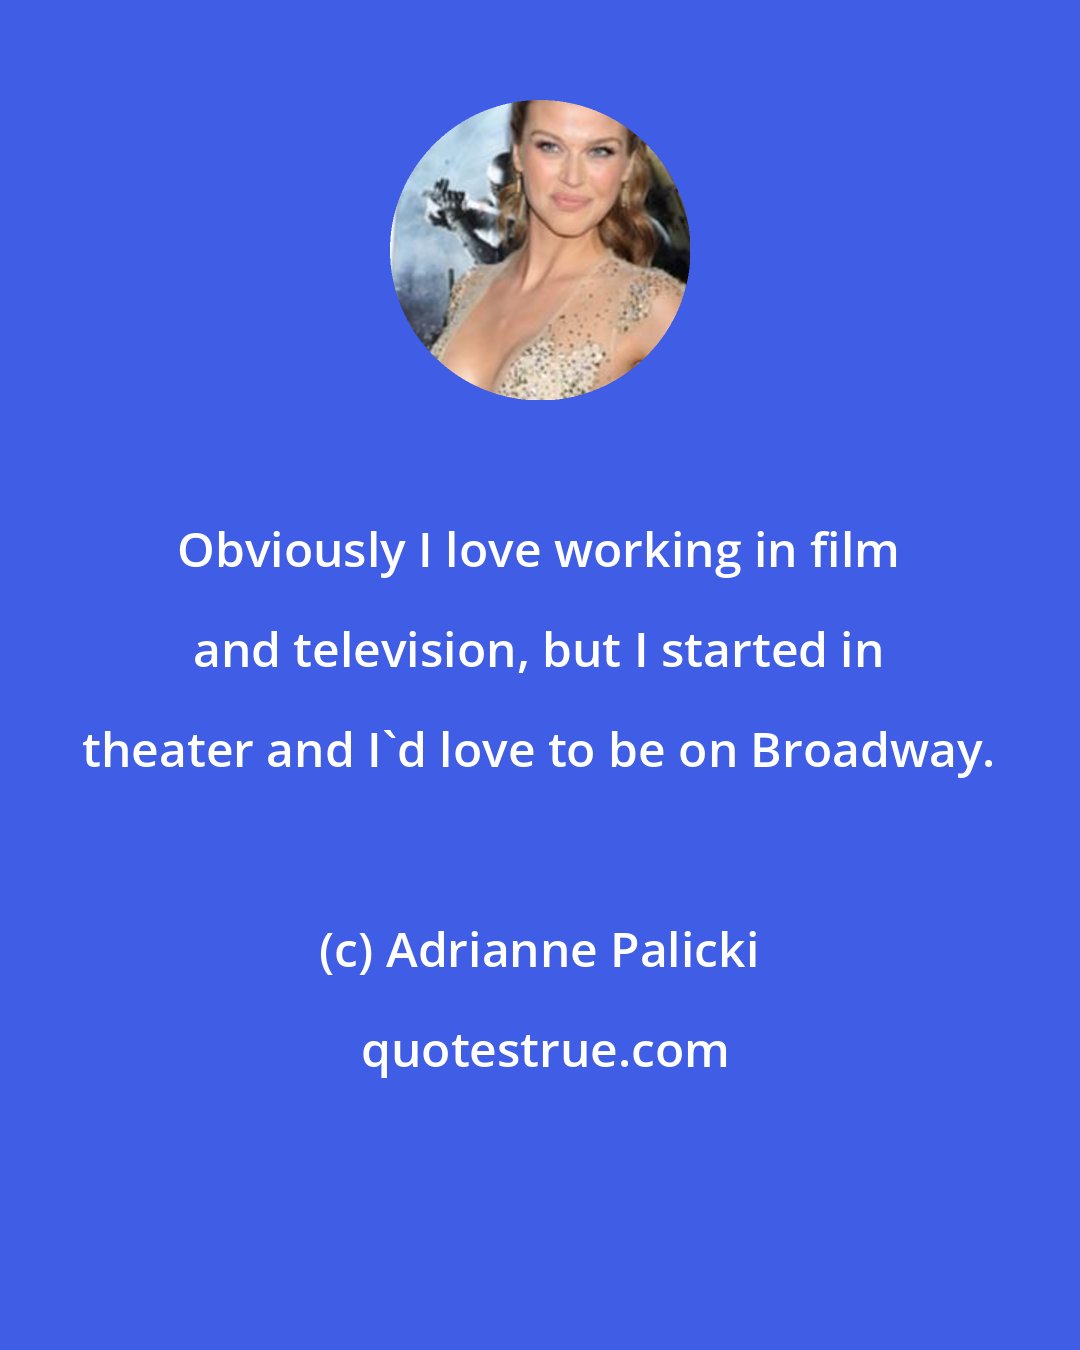 Adrianne Palicki: Obviously I love working in film and television, but I started in theater and I'd love to be on Broadway.